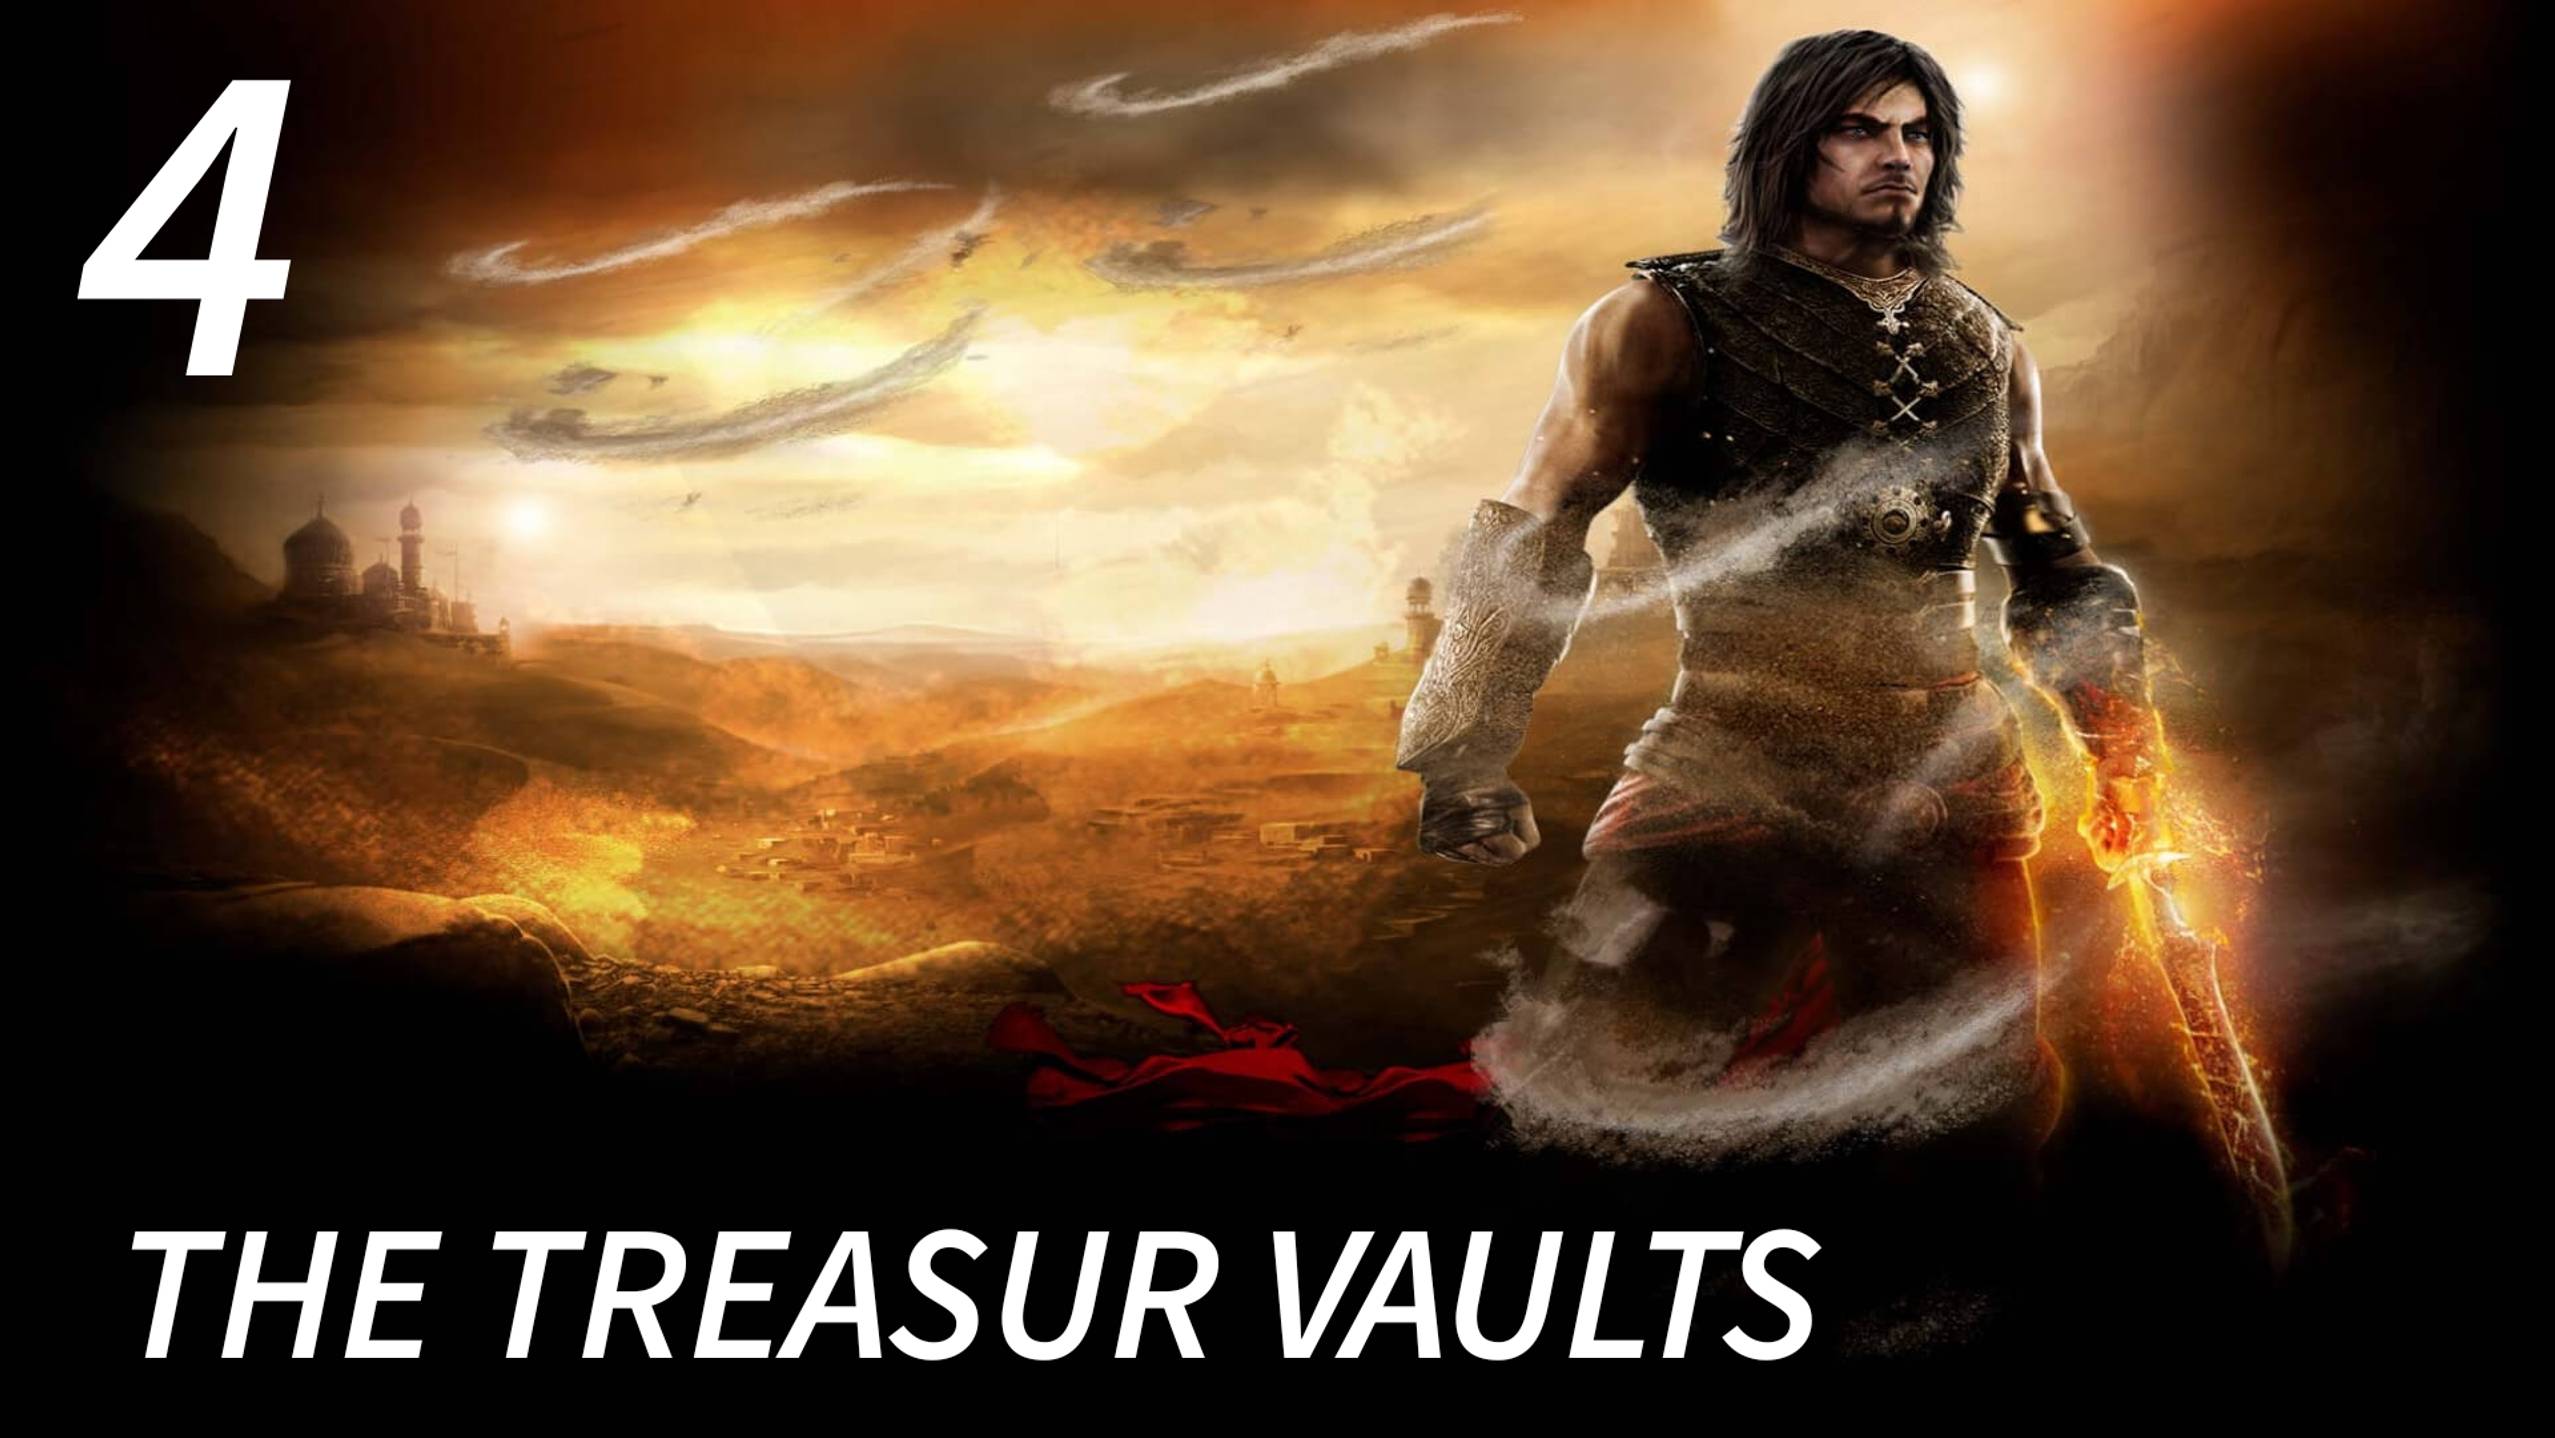 Prince Of Persia: The Forgotten Sands / The Treasure Vaults